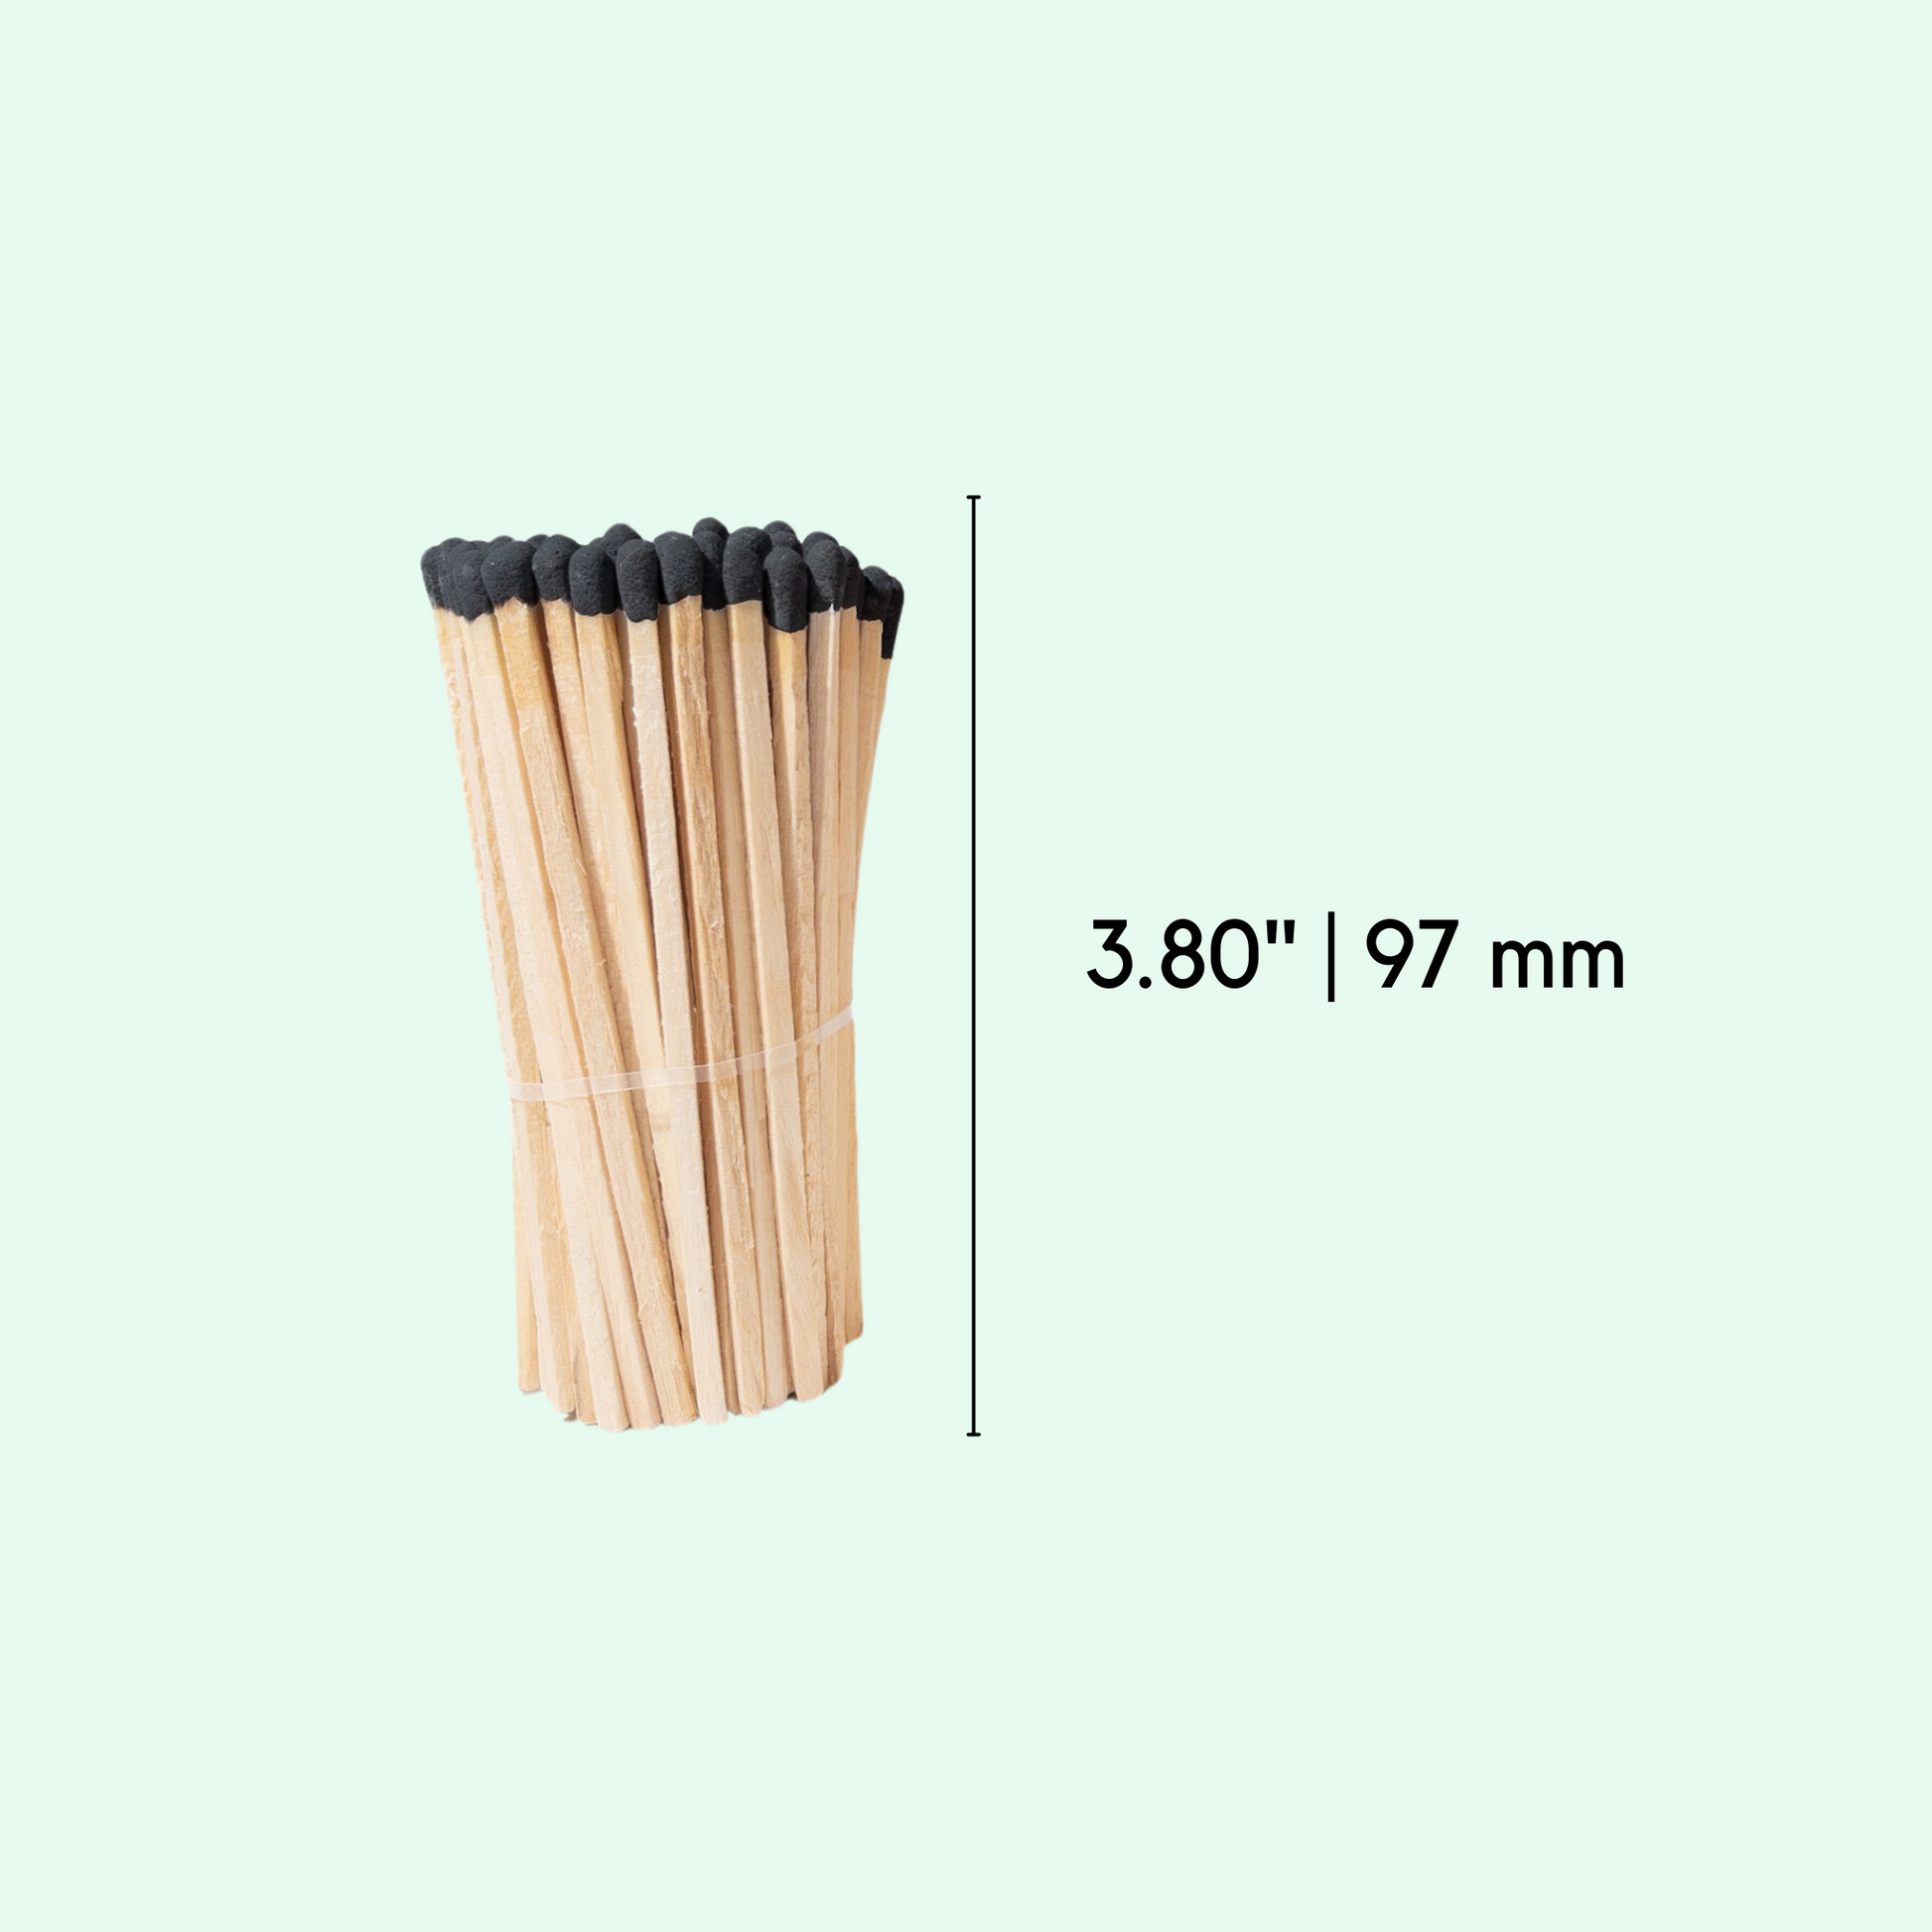 Find Elegant Wood Matches in Bulk For Varied Purposes 